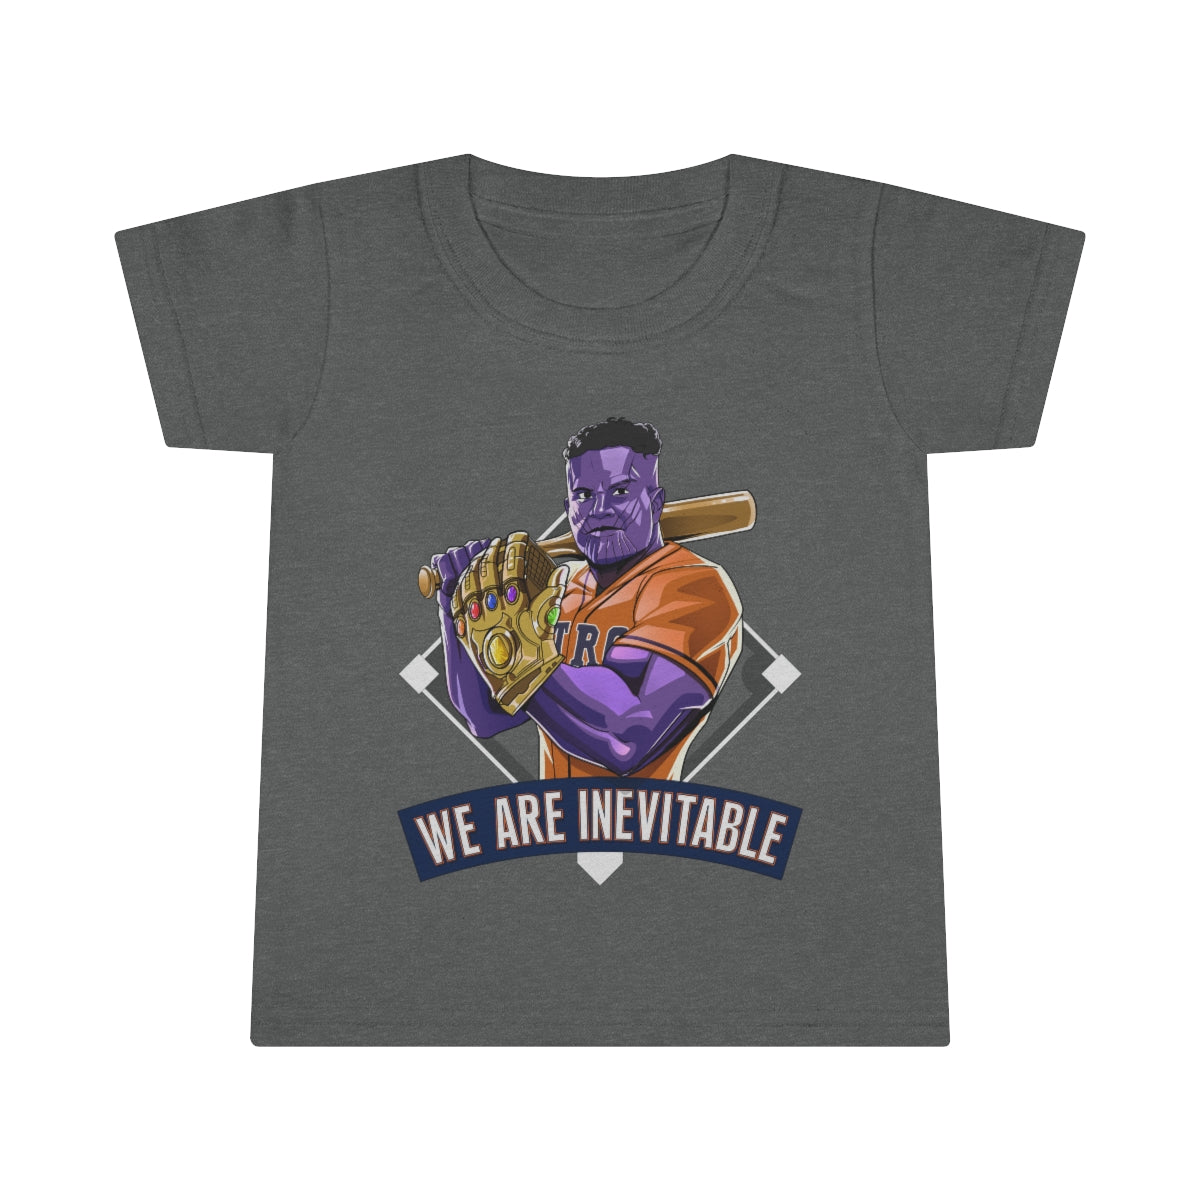 Destiny Arrives All The Same - Toddler Tee Graphite Heather / 2T Kids Clothes